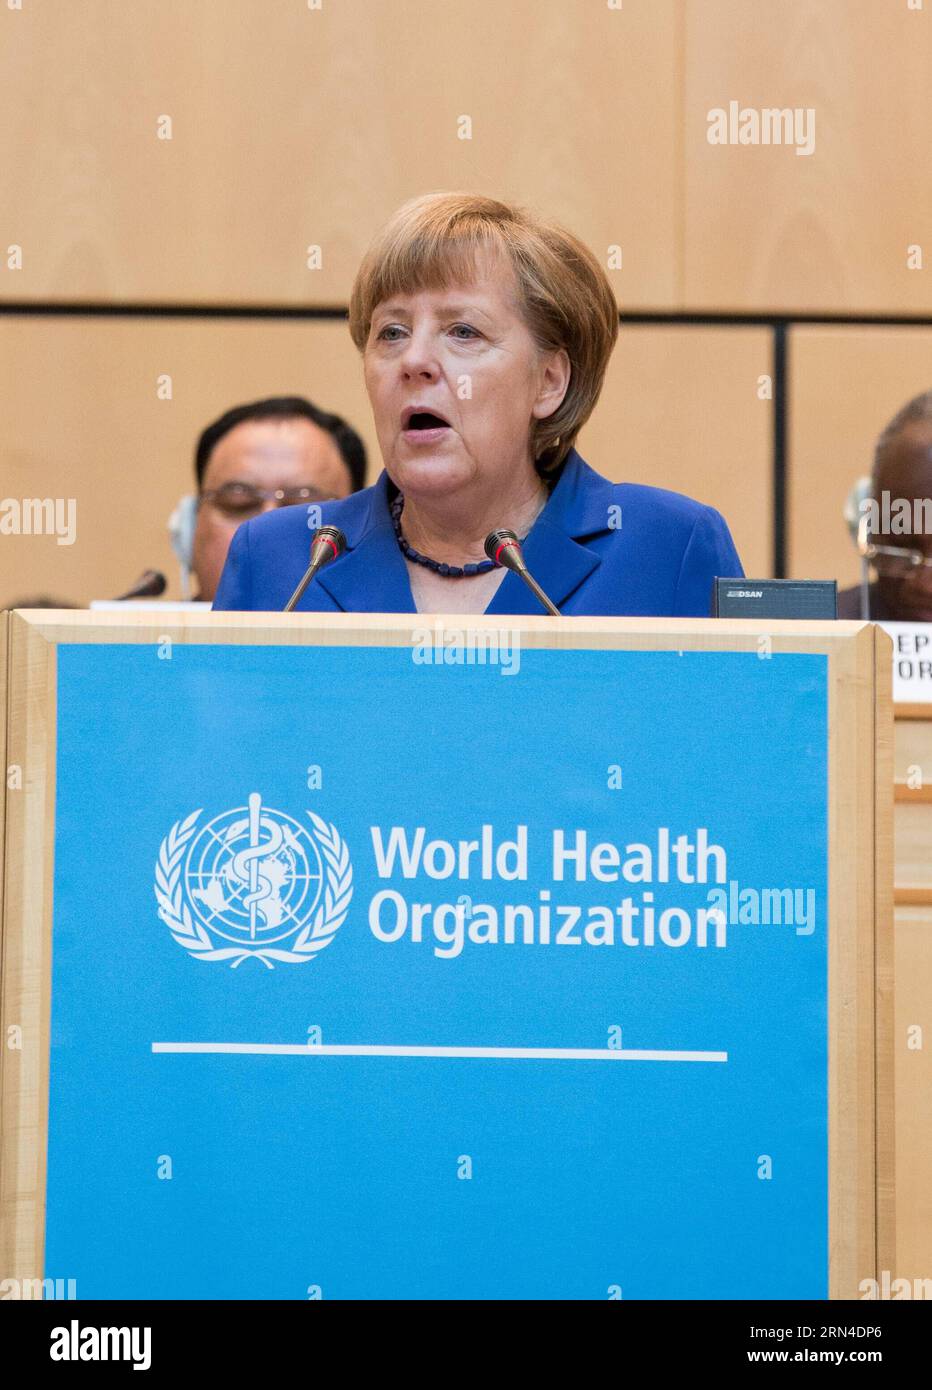 POLITIK WHO-Jahresversammlung in Genf (150518) -- GENEVA, May 18, 2015 -- German Chancellor Angela Merkel addresses the opening ceremony of the 68th session of the World Health Assembly (WHA) in Geneva, Switzerland, on May 18, 2015. The 68th session of the WHA on Monday kicked off here, over 3,000 delegates from 194 member states would focus on the discussion of Ebola outbreaks and the post-2015 health agenda. ) SWITZERLAND-GENEVA-WHA-68TH SESSION XuxJinquan PUBLICATIONxNOTxINxCHN   politics Who Annual Meeting in Geneva  Geneva May 18 2015 German Chancellor Angela Merkel addresses The Opening Stock Photo